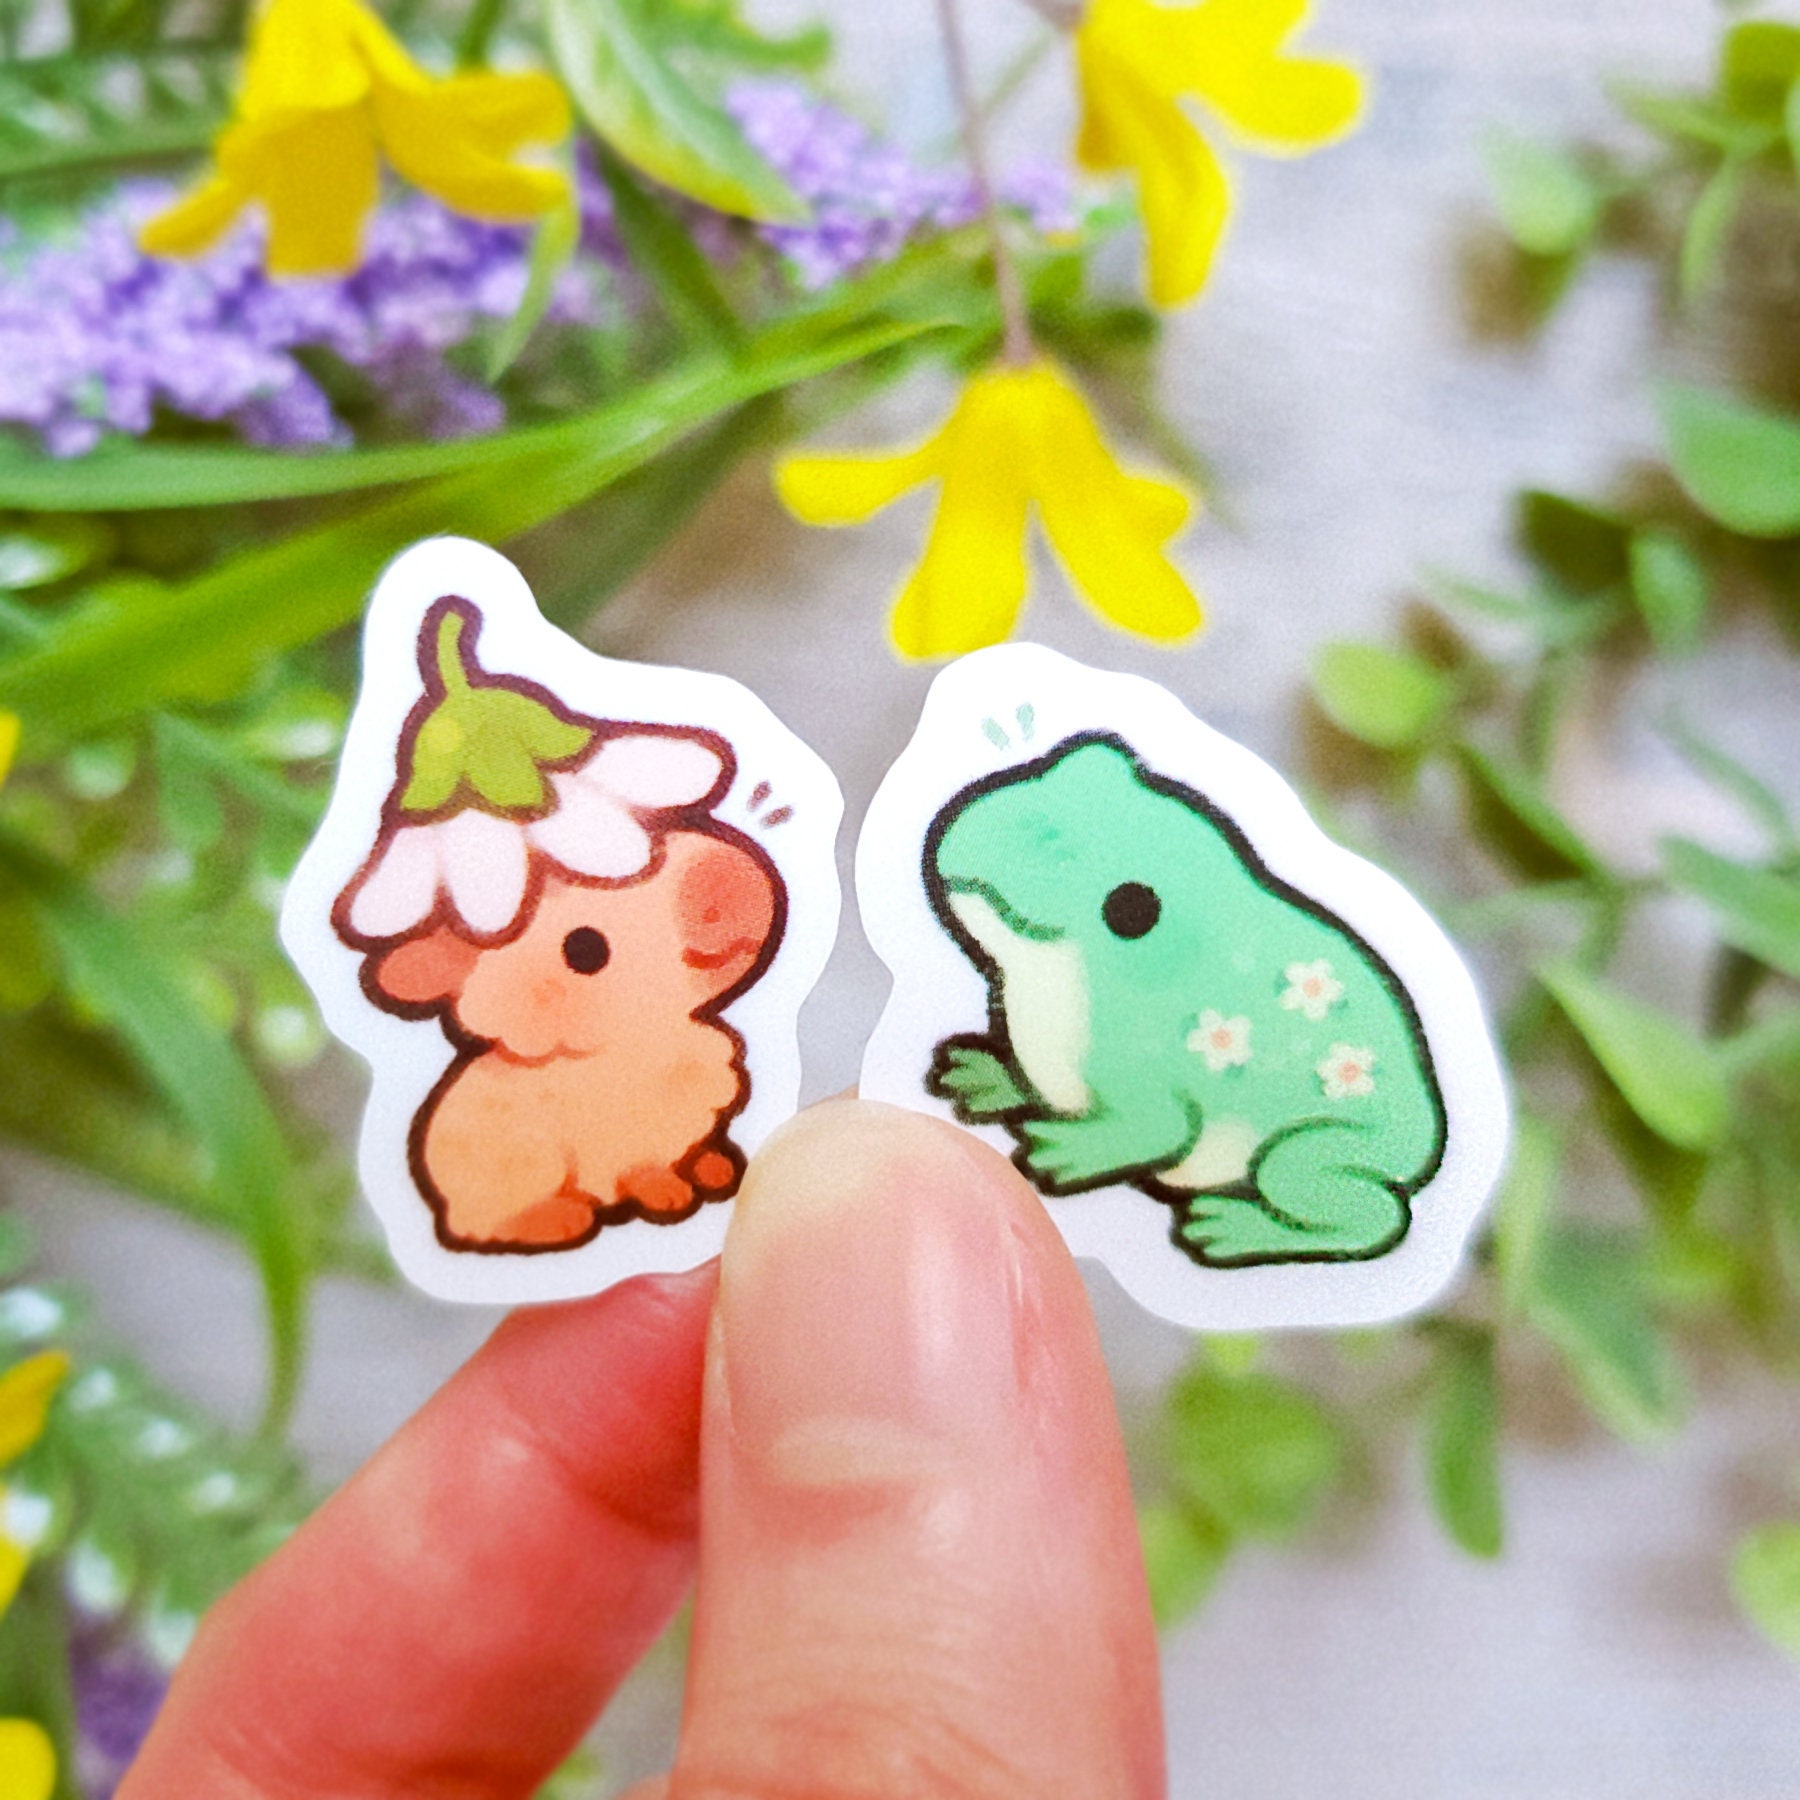 Flower Friends . . . . #doodle #frog #capybara #capybaras #cutememes  #sillymemes #silly #pickone #animals #cuteanimal #relatablememes #m